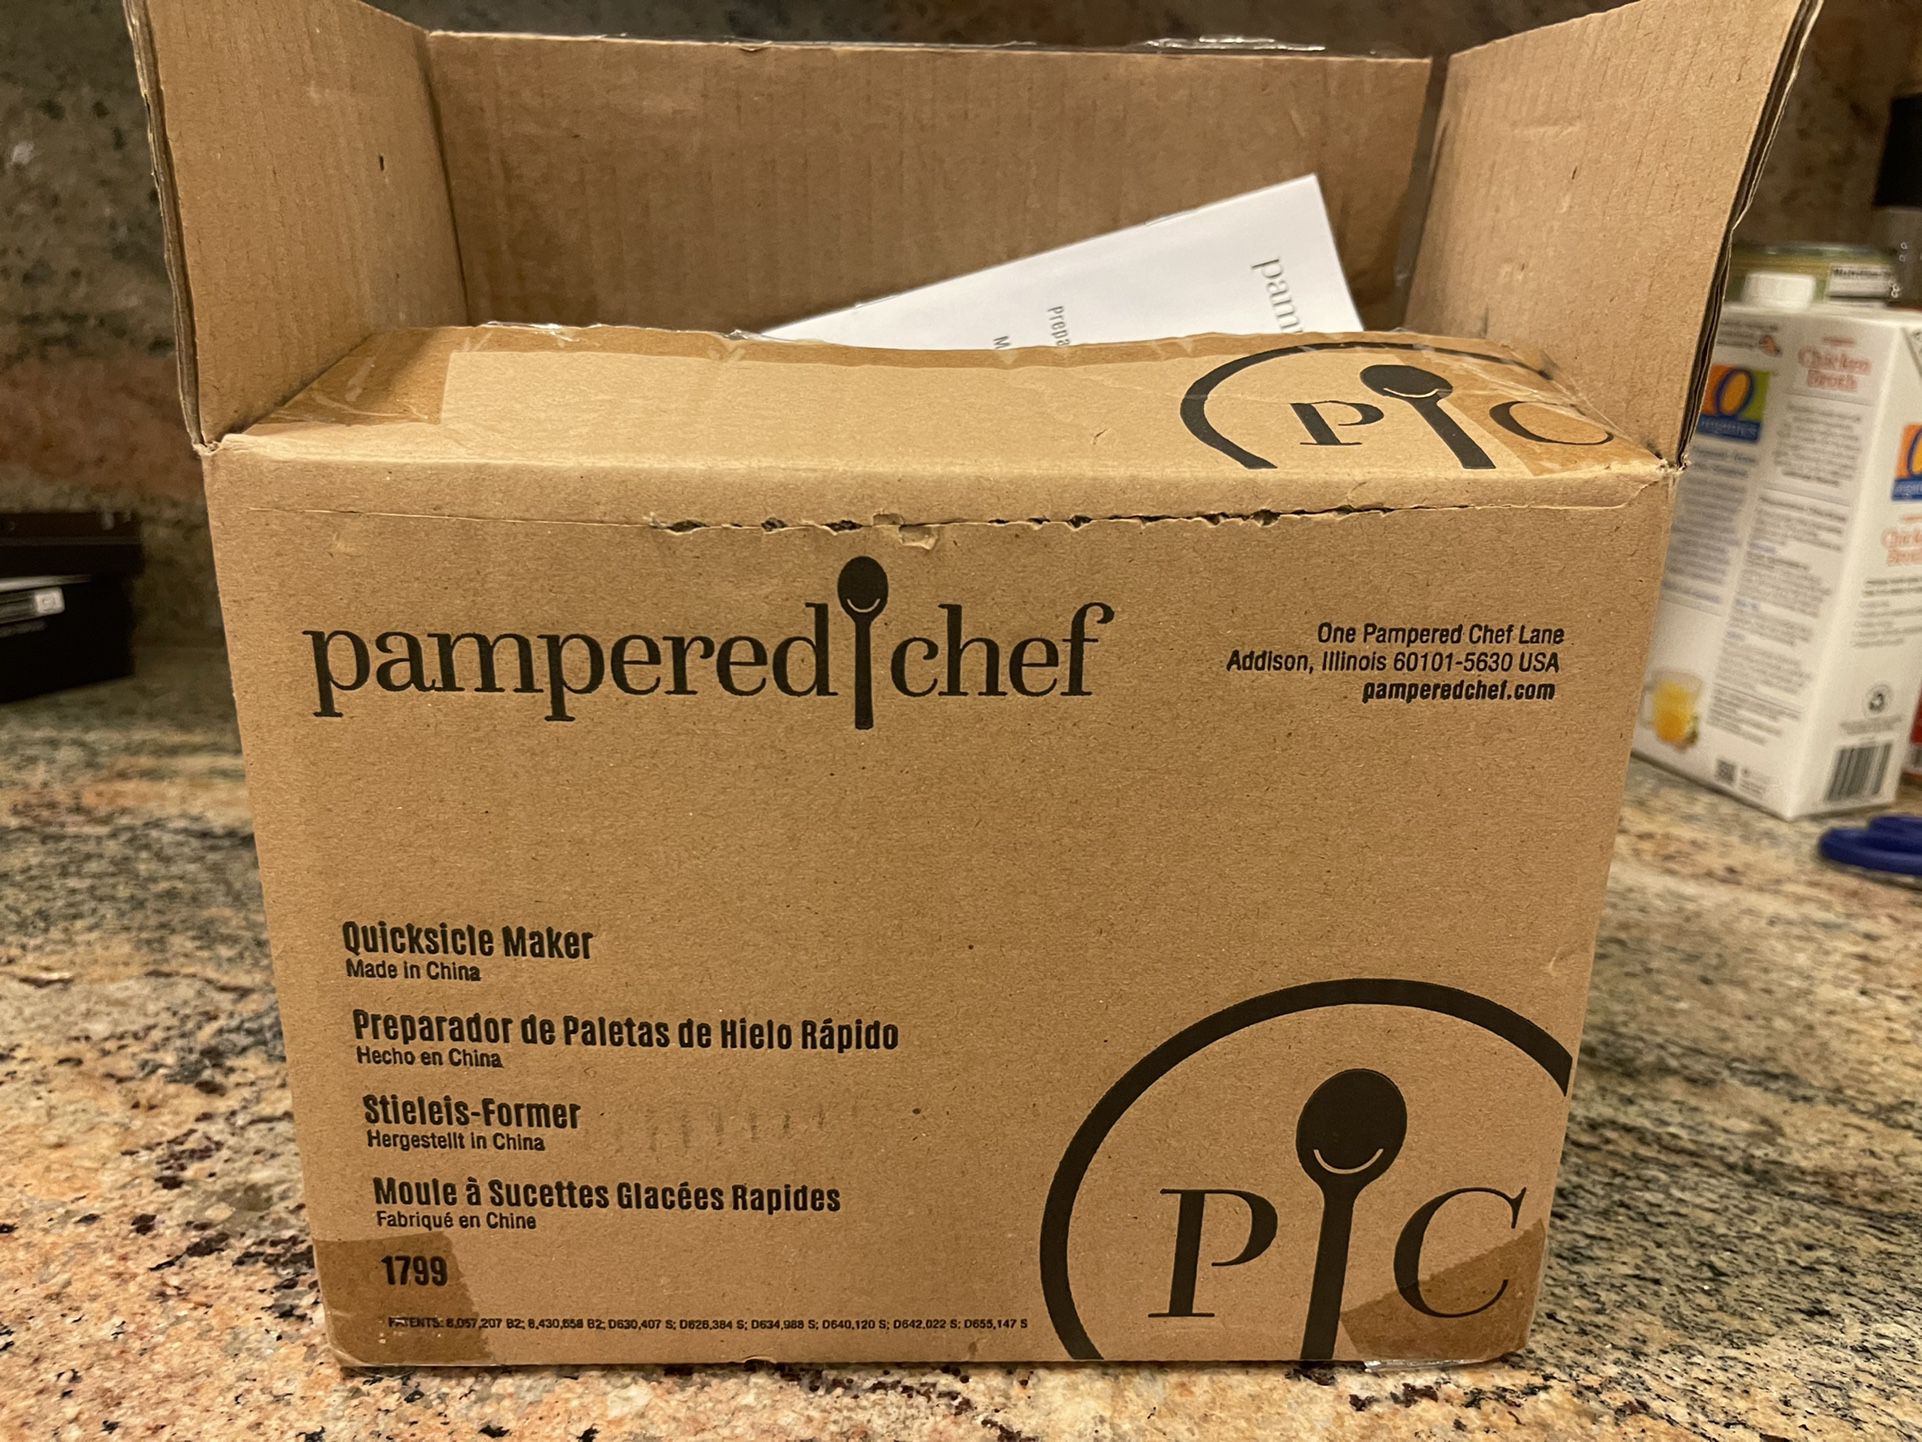 Pampered chef Quicksicle Maker